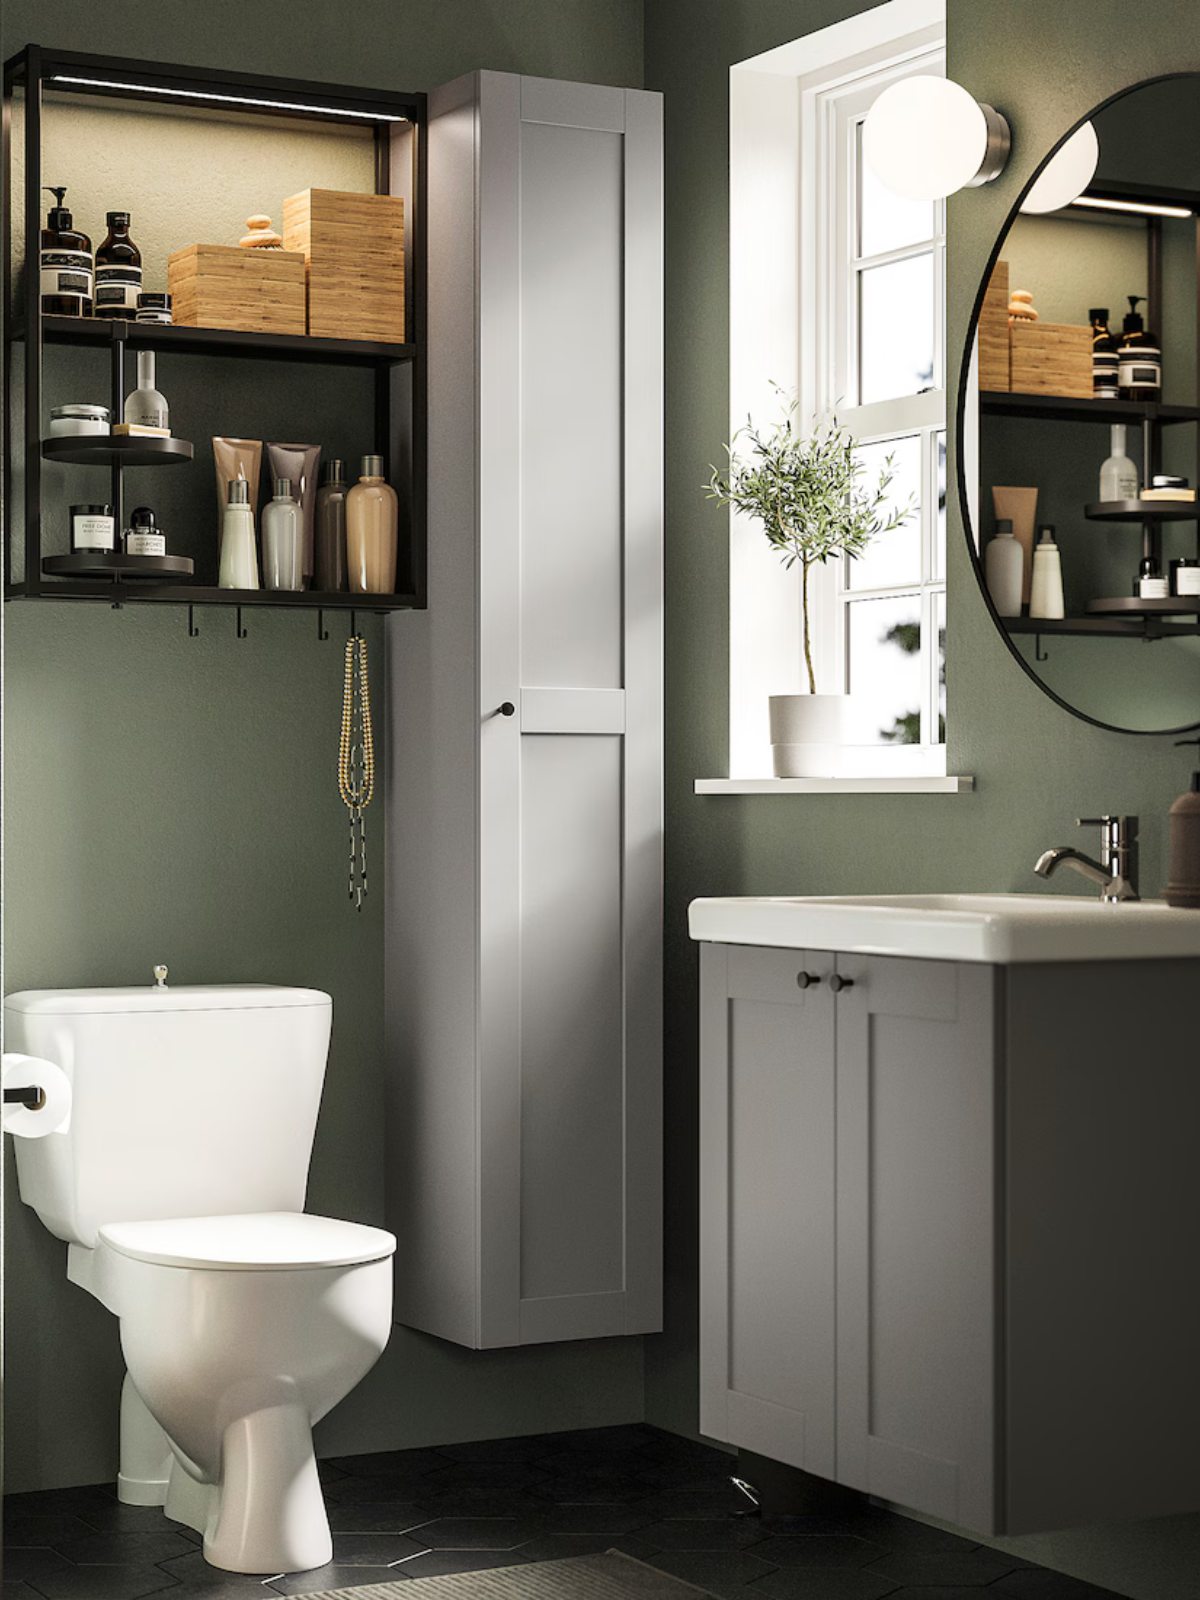 powder room with toilet, floor tiles, green painted walls, storage cabinet and window